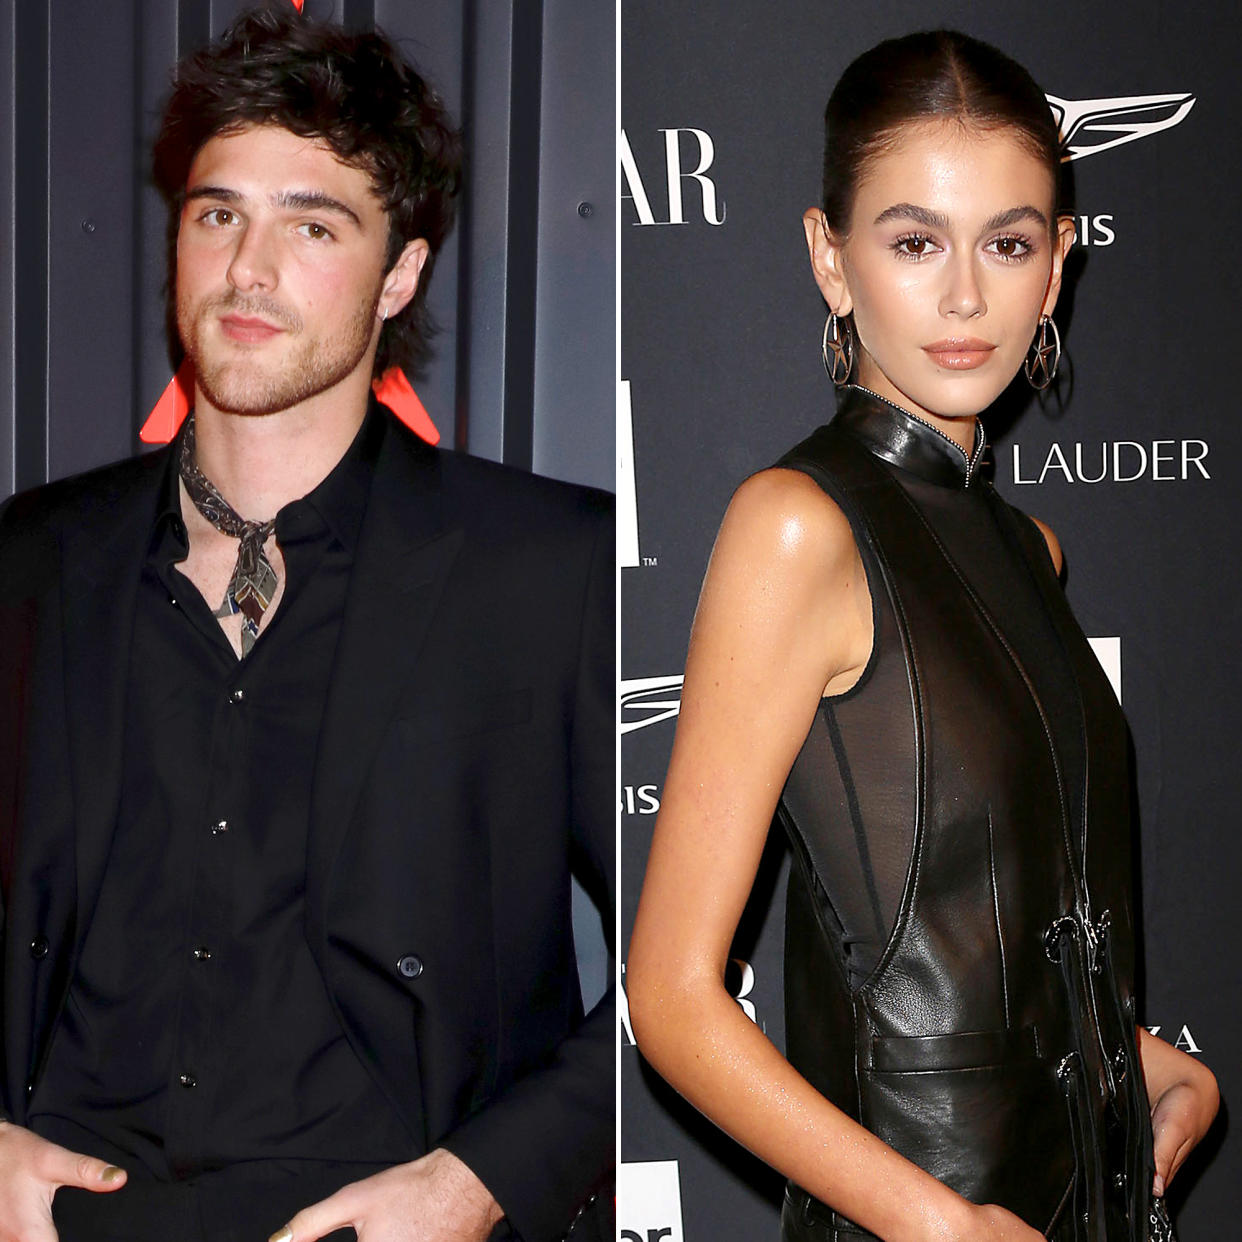 Jacob Elordi and Kaia Gerber Confirm Their Romance With a Kiss While Waking Her Dog 1